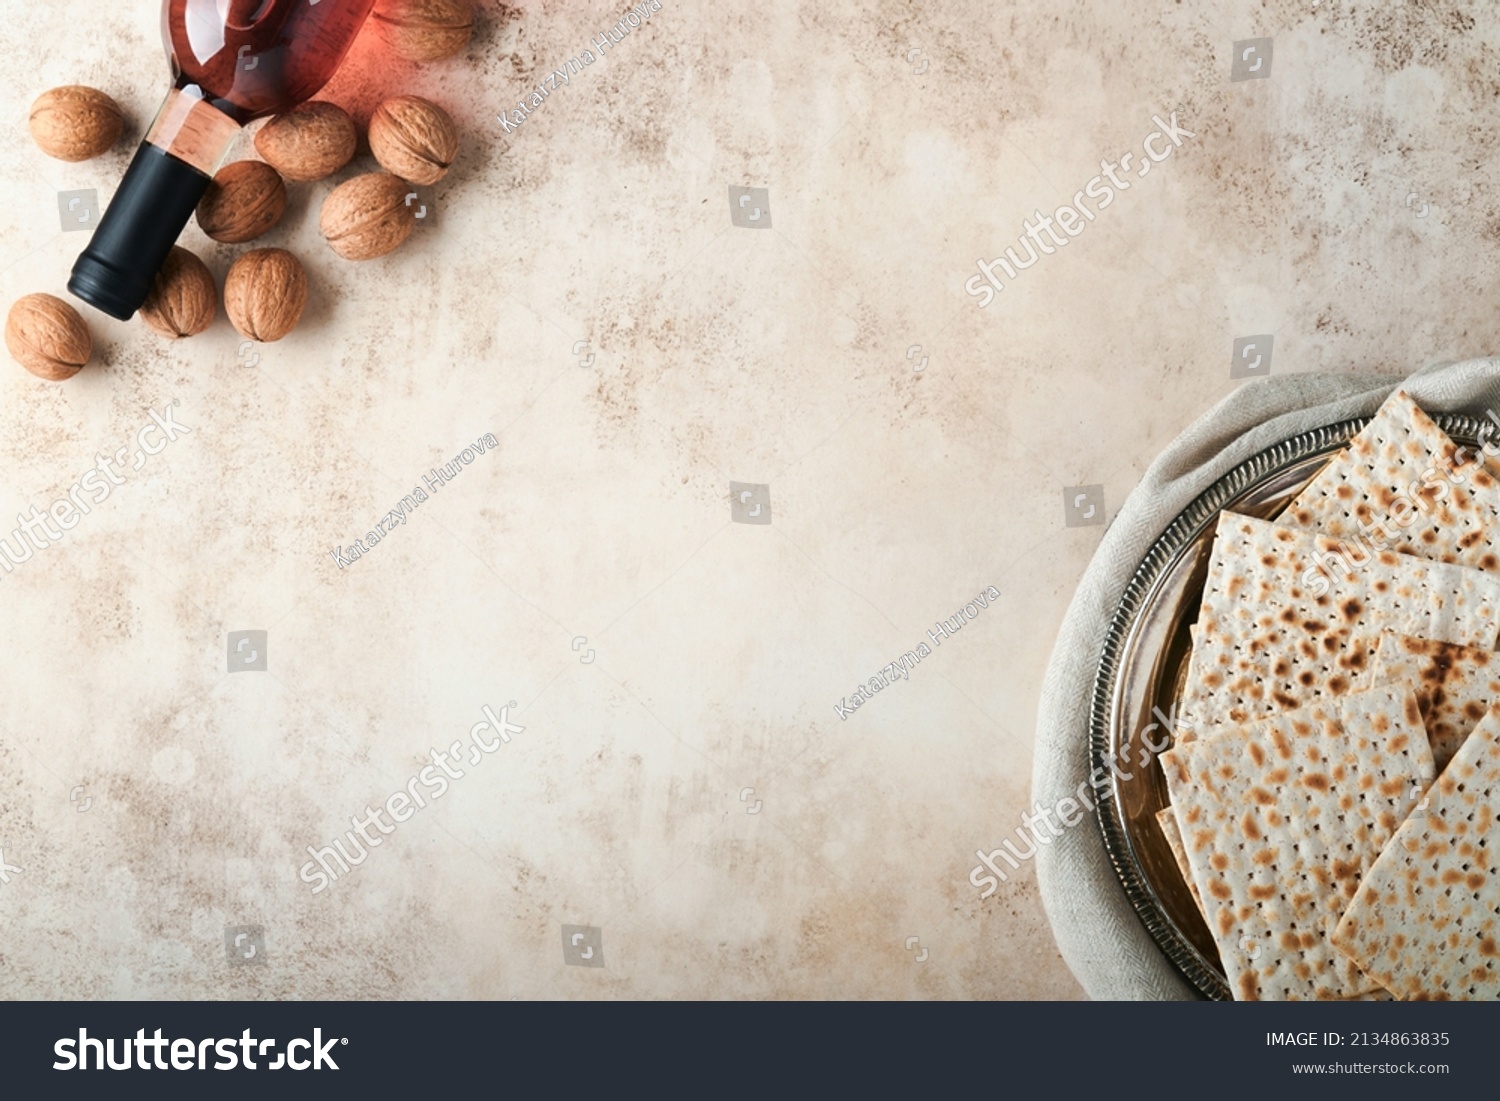 Passover celebration concept. Matzah, red kosher and walnut. Traditional ritual Jewish bread on sand color old concrete background. Passover food. Pesach Jewish holiday. #2134863835